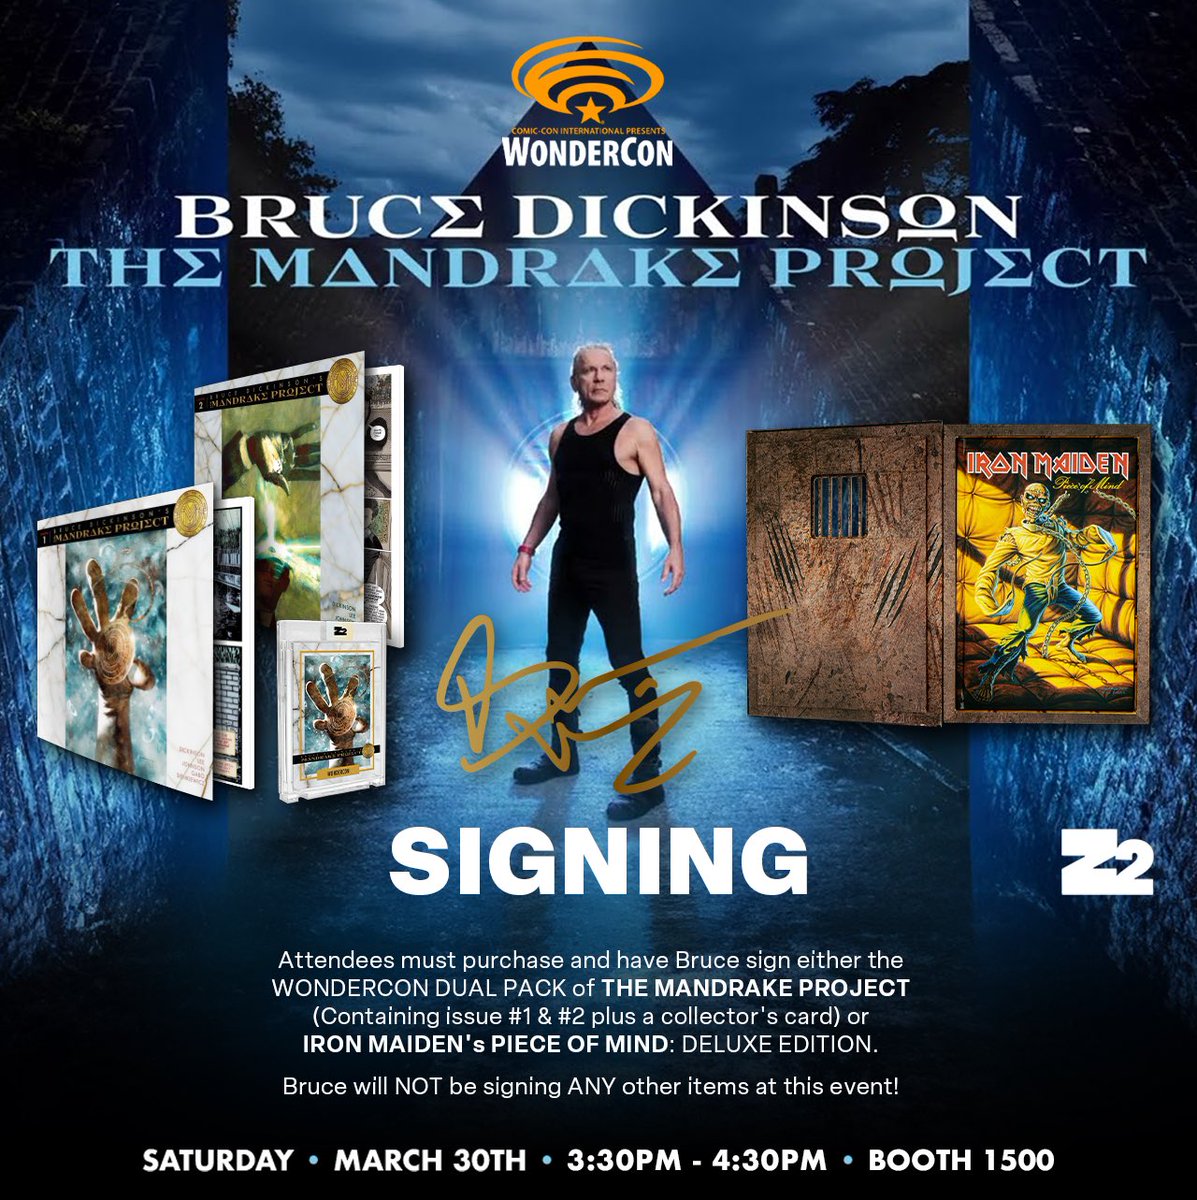 Get ready, Anaheim!⚡️ Legendary #BruceDickinson will be at booth #1500 on Saturday at 3:30PM signing the anticipated graphic novel, Bruce Dickinson’s #TheMandrakeProject ☠️ We thank you in advance for not taking photos!